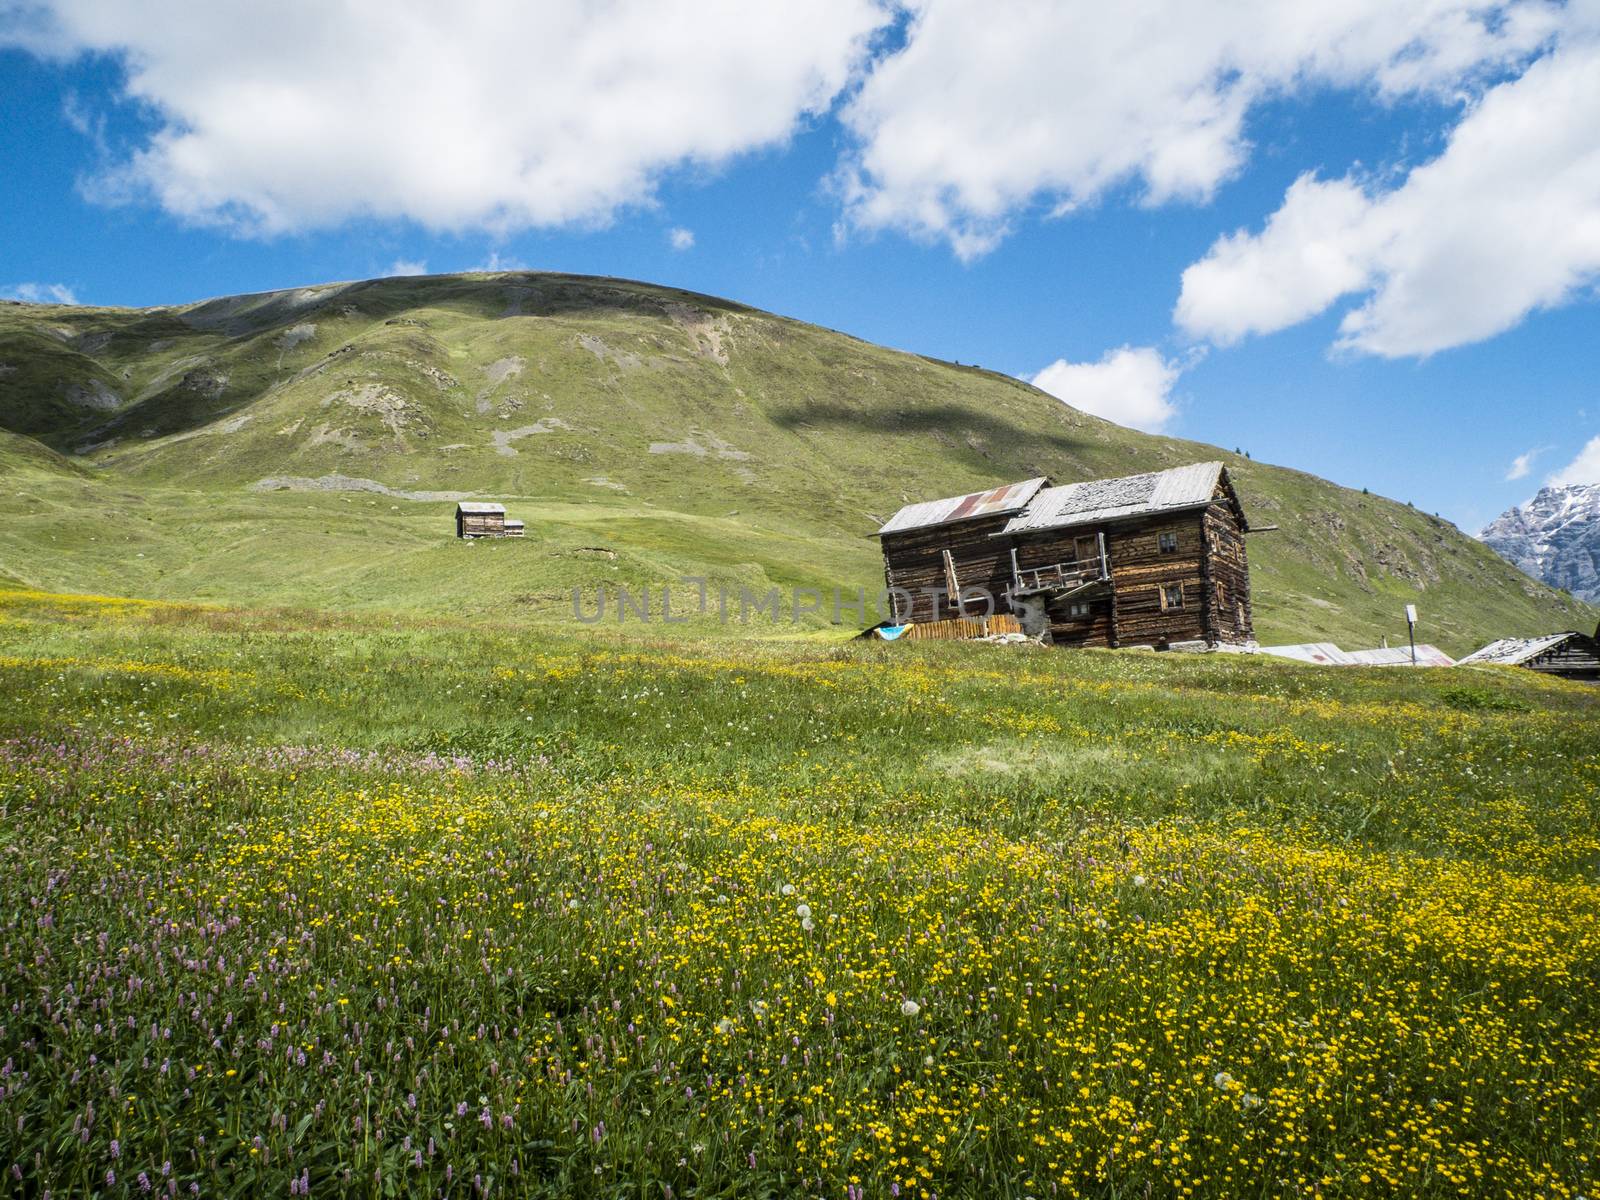 Italy, Lombardy, Livigno, alpine mountain landscape in summer with flowery meadows and with wooden huts, traditional alpine constructions